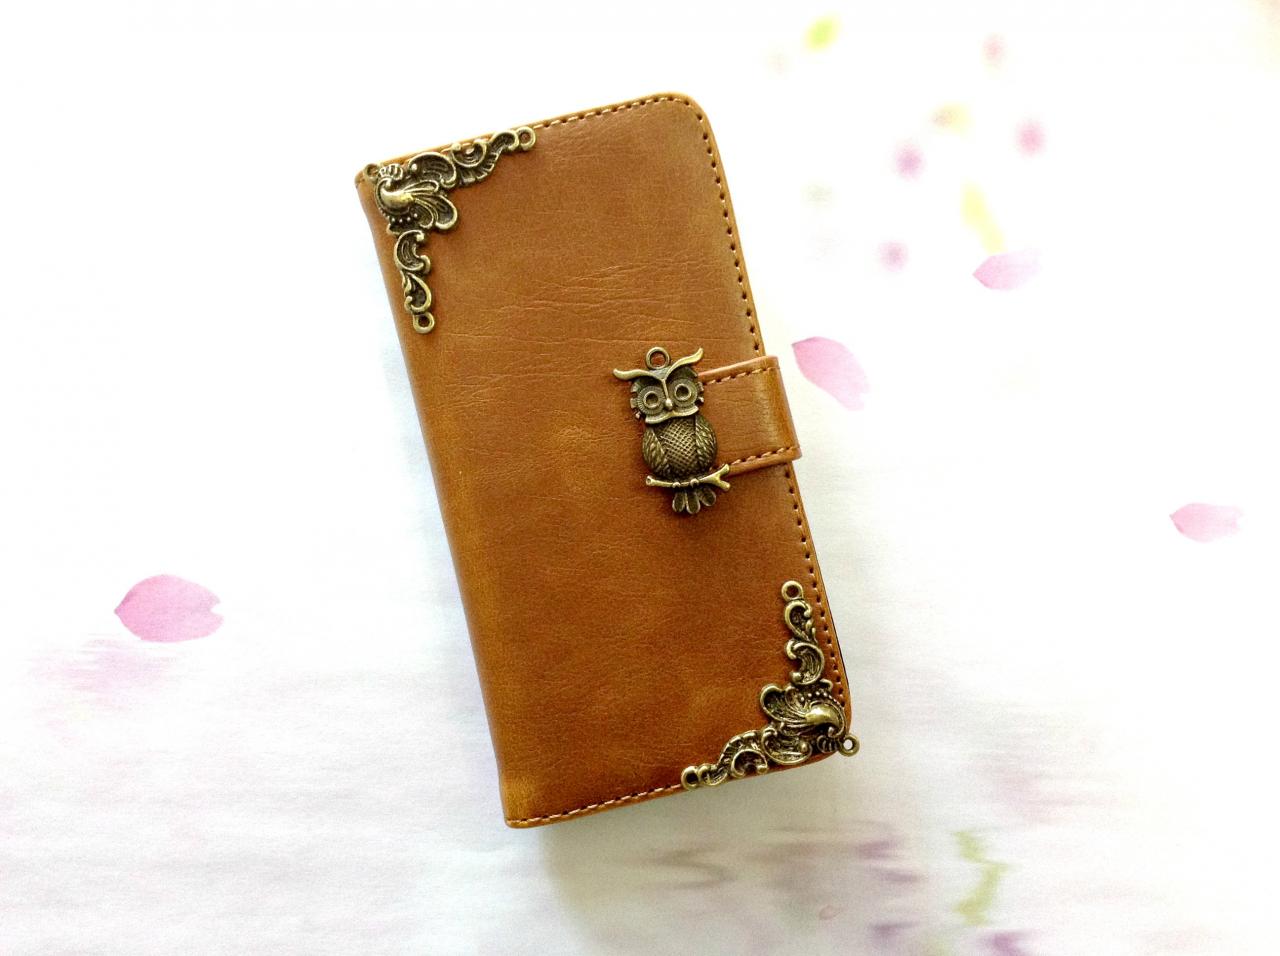 Owl Iphone 6 4.7 Leather Wallet Case, Vintage Iphone 6 Plus Leather Wallet Case, Iphone 5c, 5, 5s Leather Wallet Case, Samsung Galaxy S3, S4, S5,